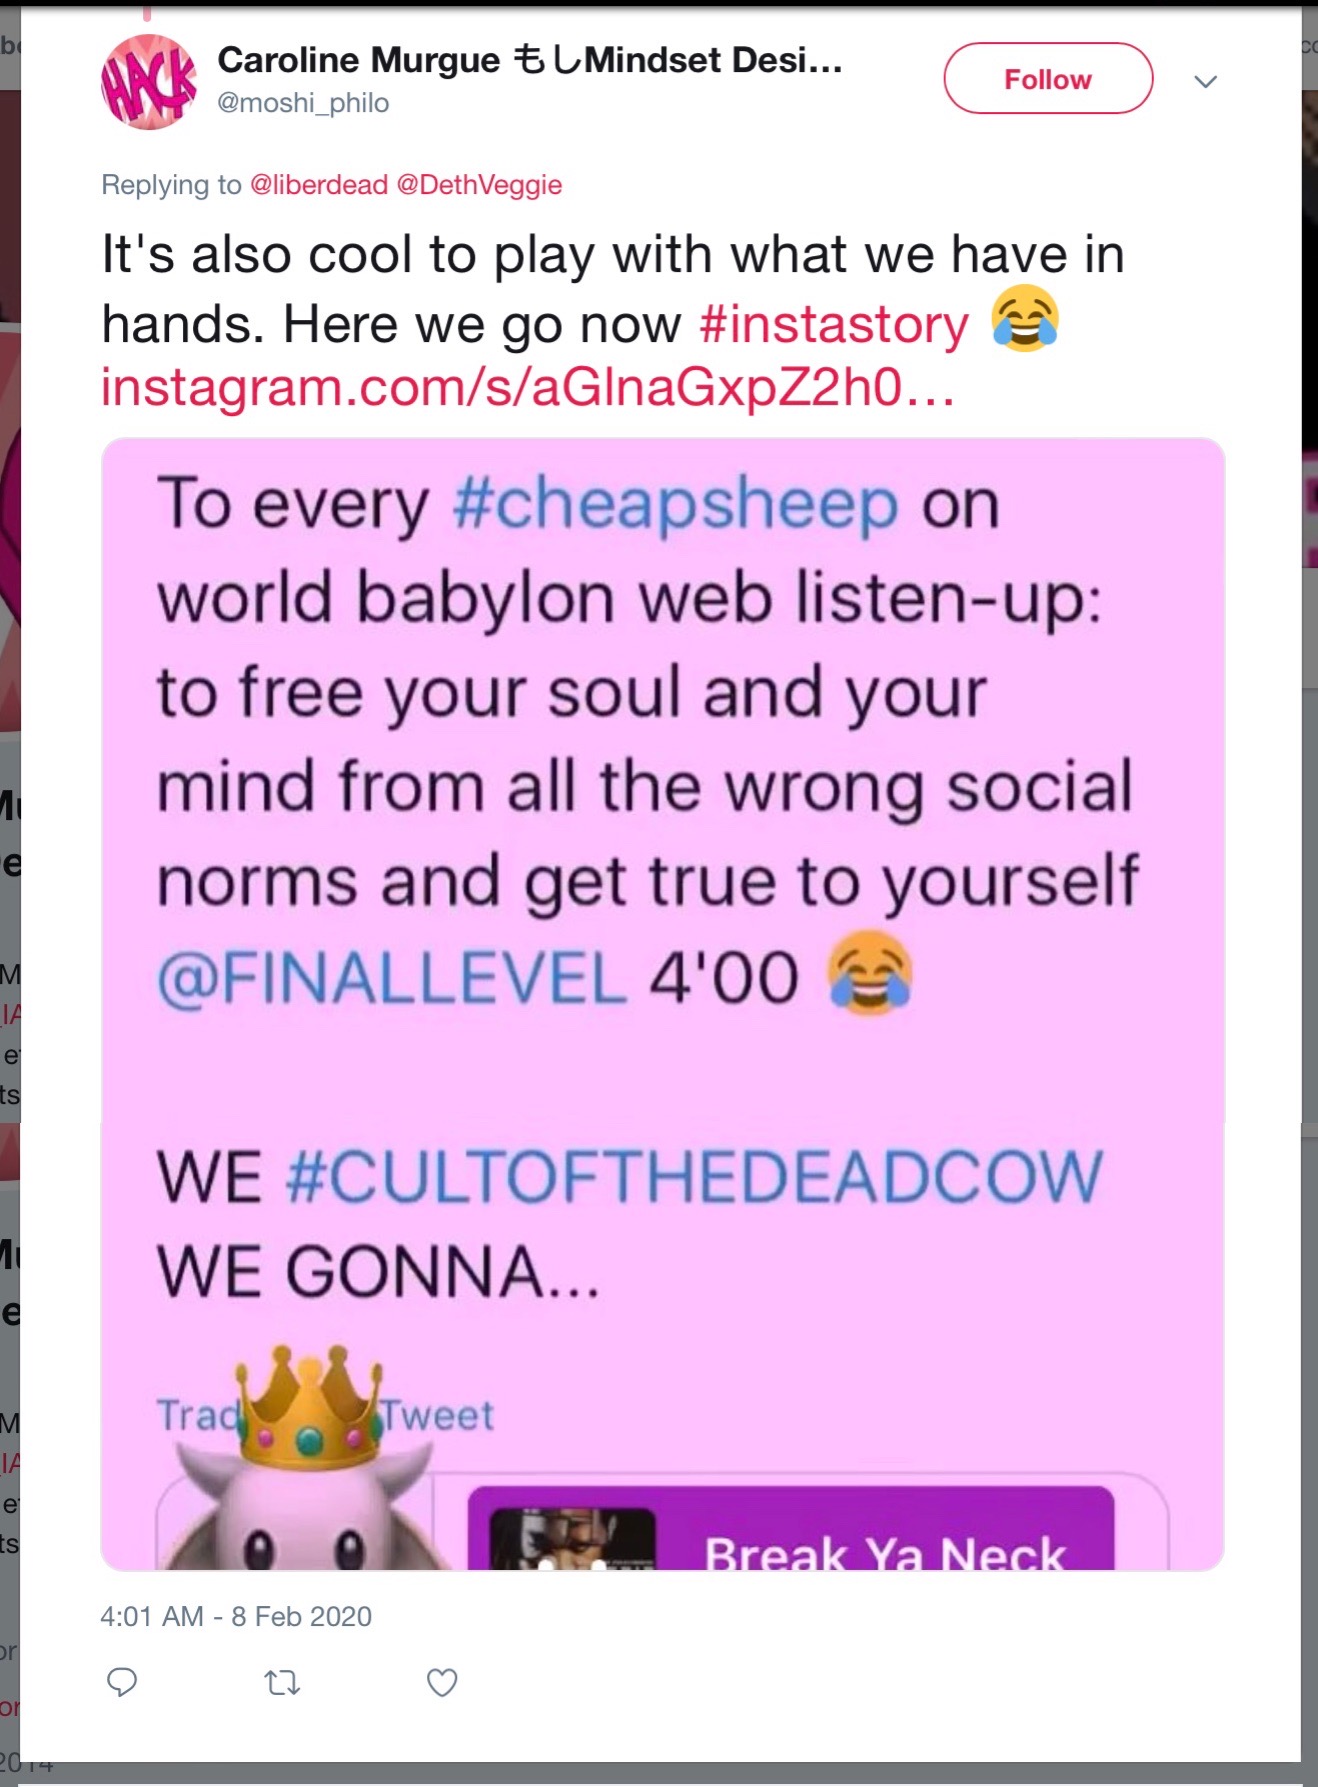 8 Feb 2020 tweet from @moshi_philo: It's also cool to play with what we have in hands. Here we go now #instastory; and then a quote tweet: To every #cheapsheep on world babylon web listen-up: to free your soul and your mind from all the wrong social norms and get true to yourself @FINALLEVEL 4'00 WE #CULTOFTHEDEADCOW WE GONNA... [Break Ya Neck]